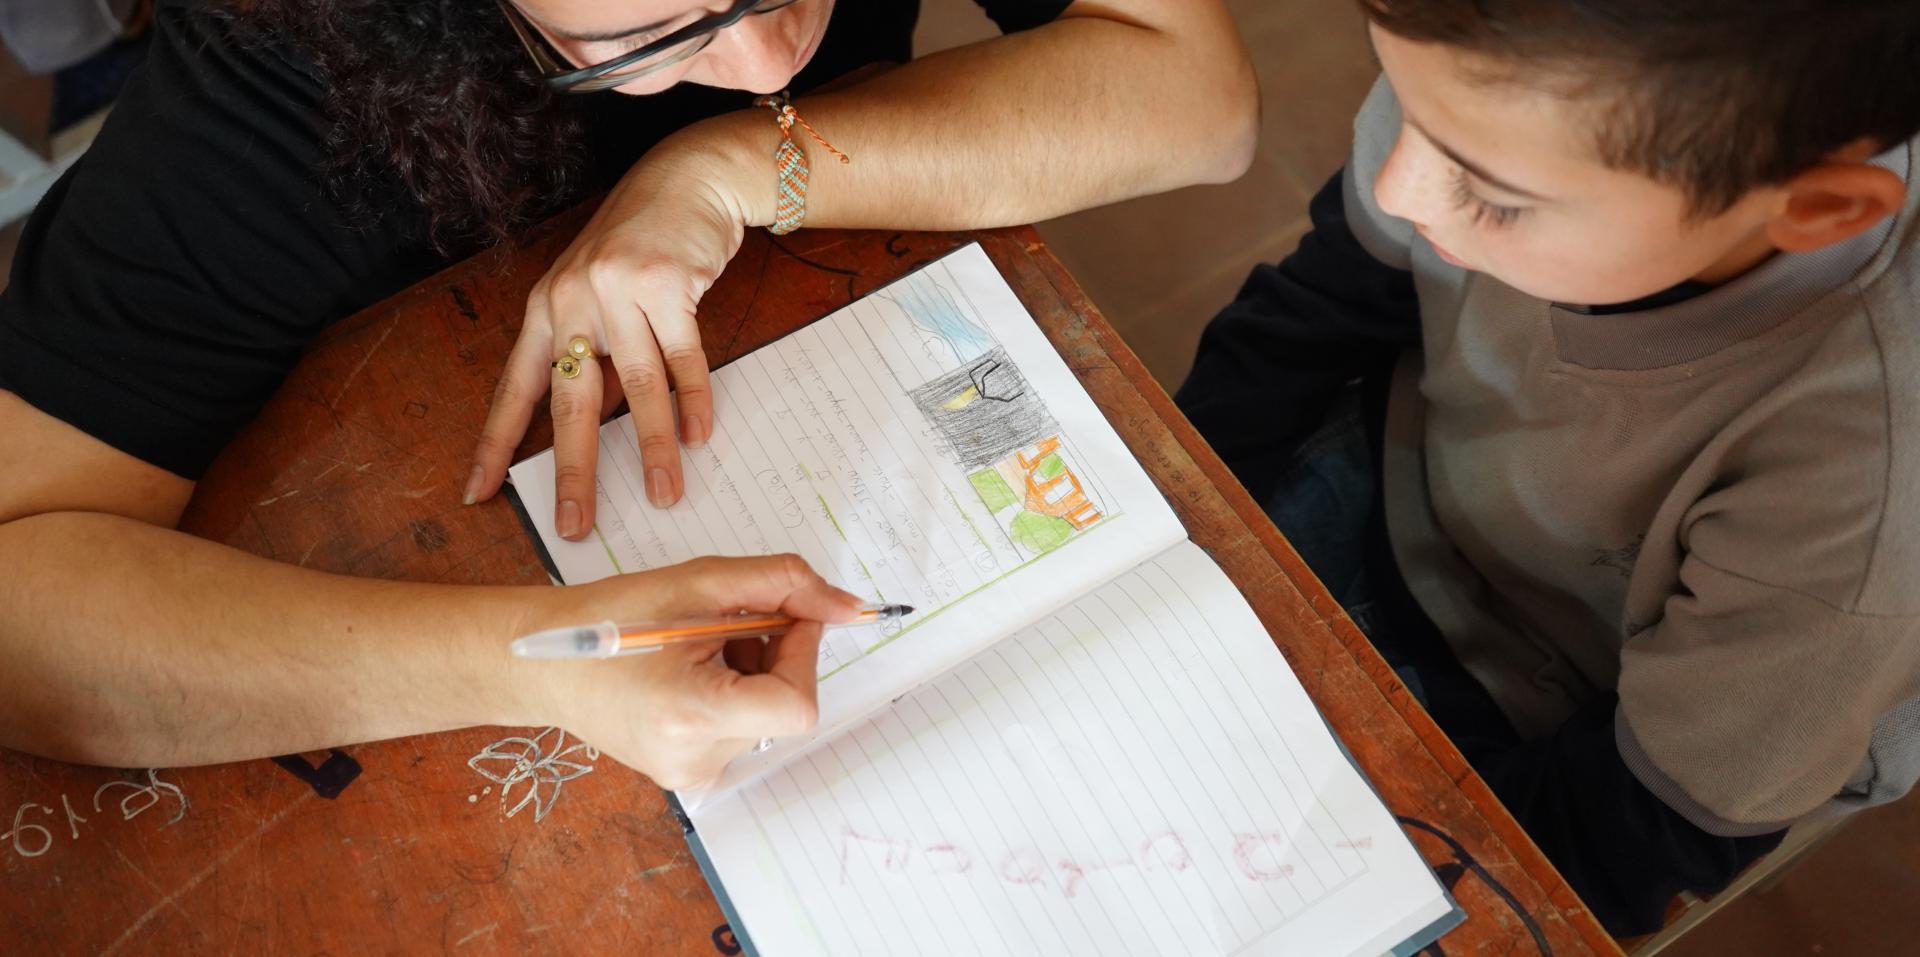 Overhead shot of a teacher and young boy reviewing an entry in a notebook together